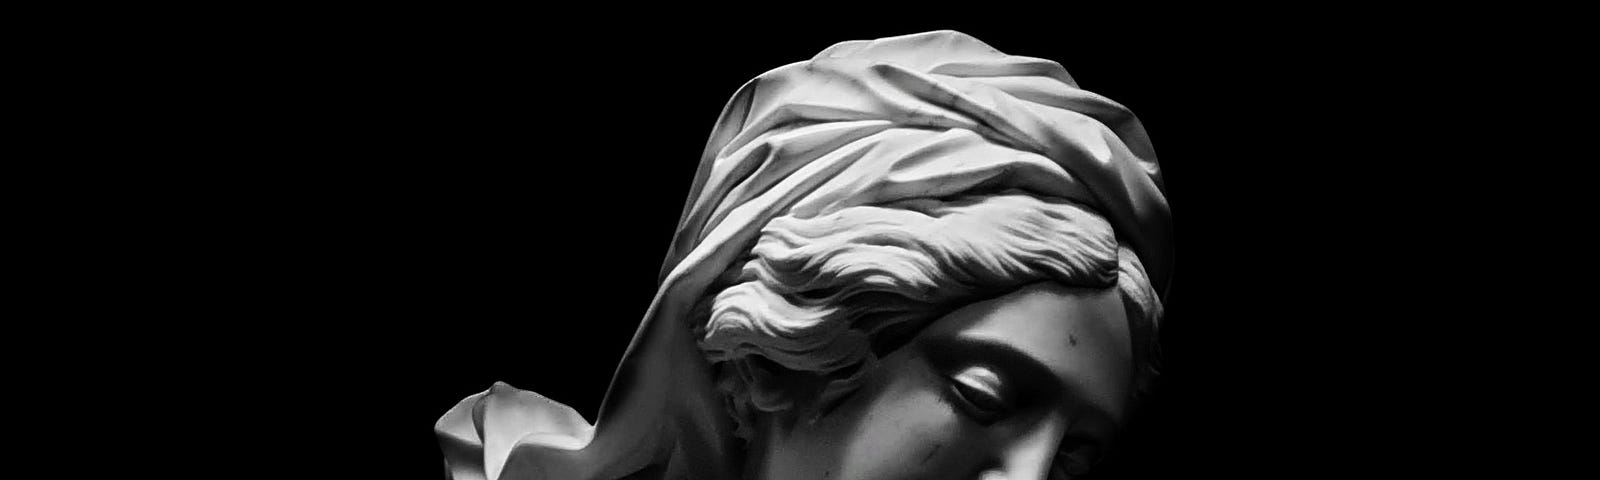 Grayscale photo of an ancient Roman marble sculpture called ‘Maria Annunciata’ by Domenico Guidi